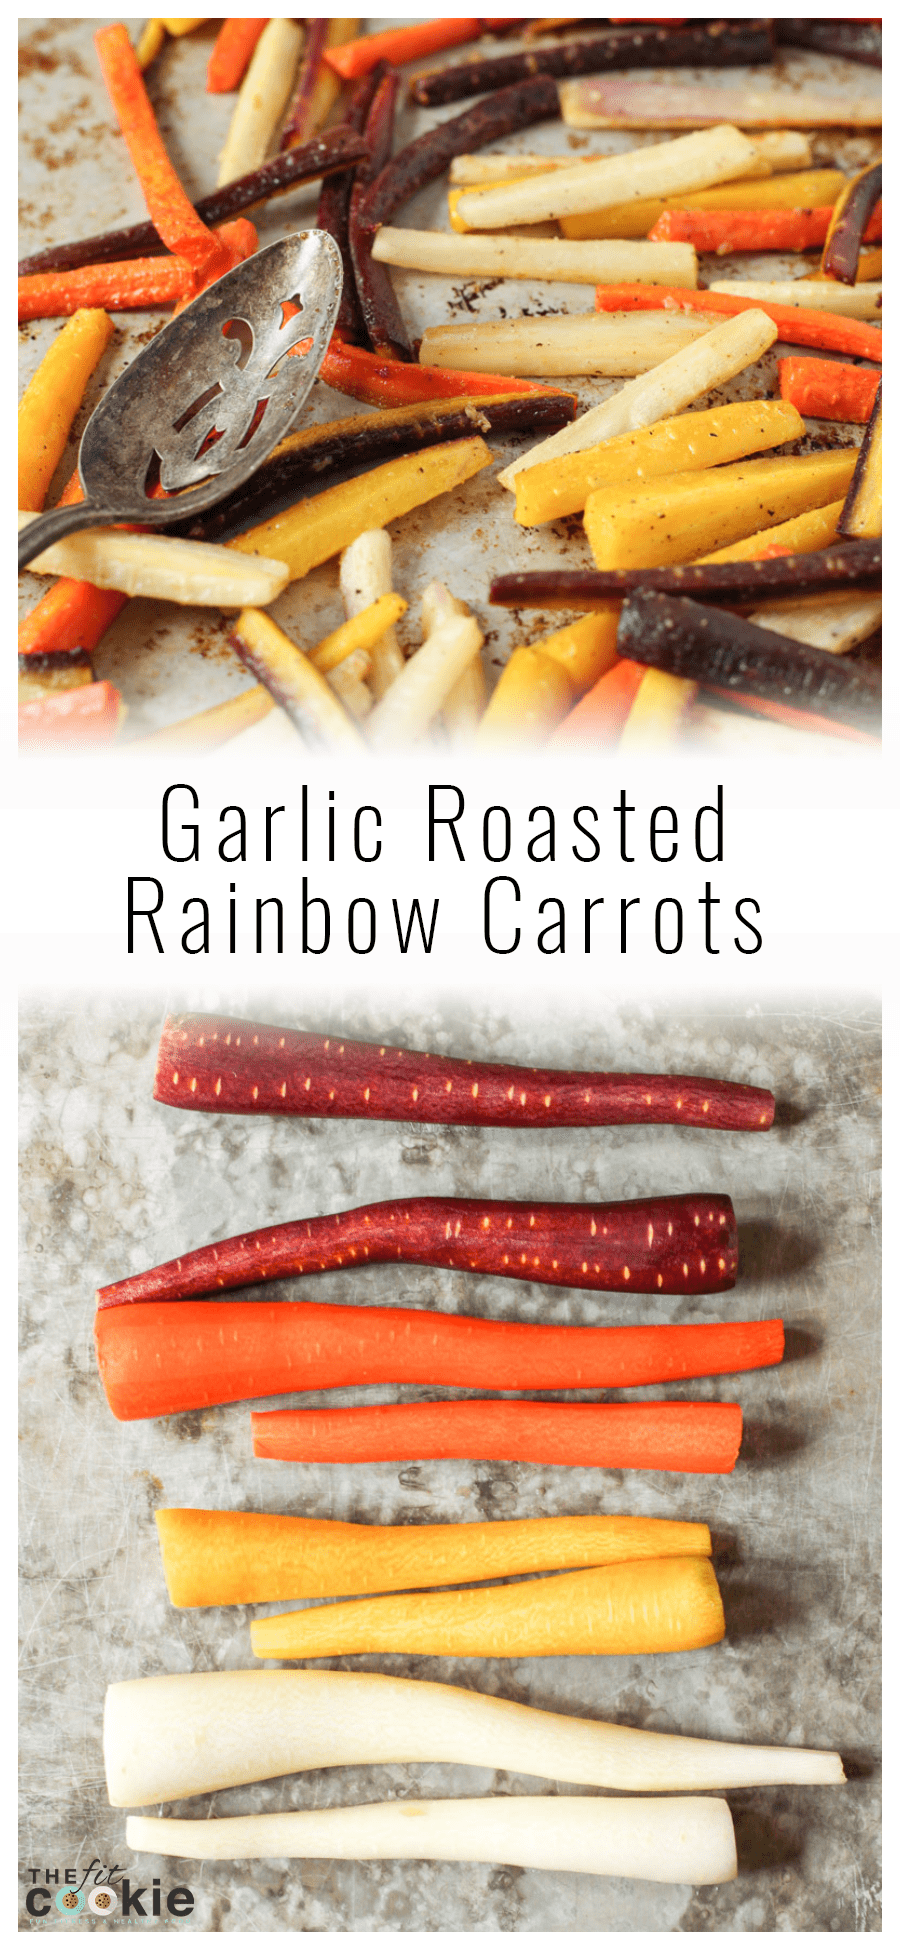 image collage of roasted rainbow carrots on a baking sheet